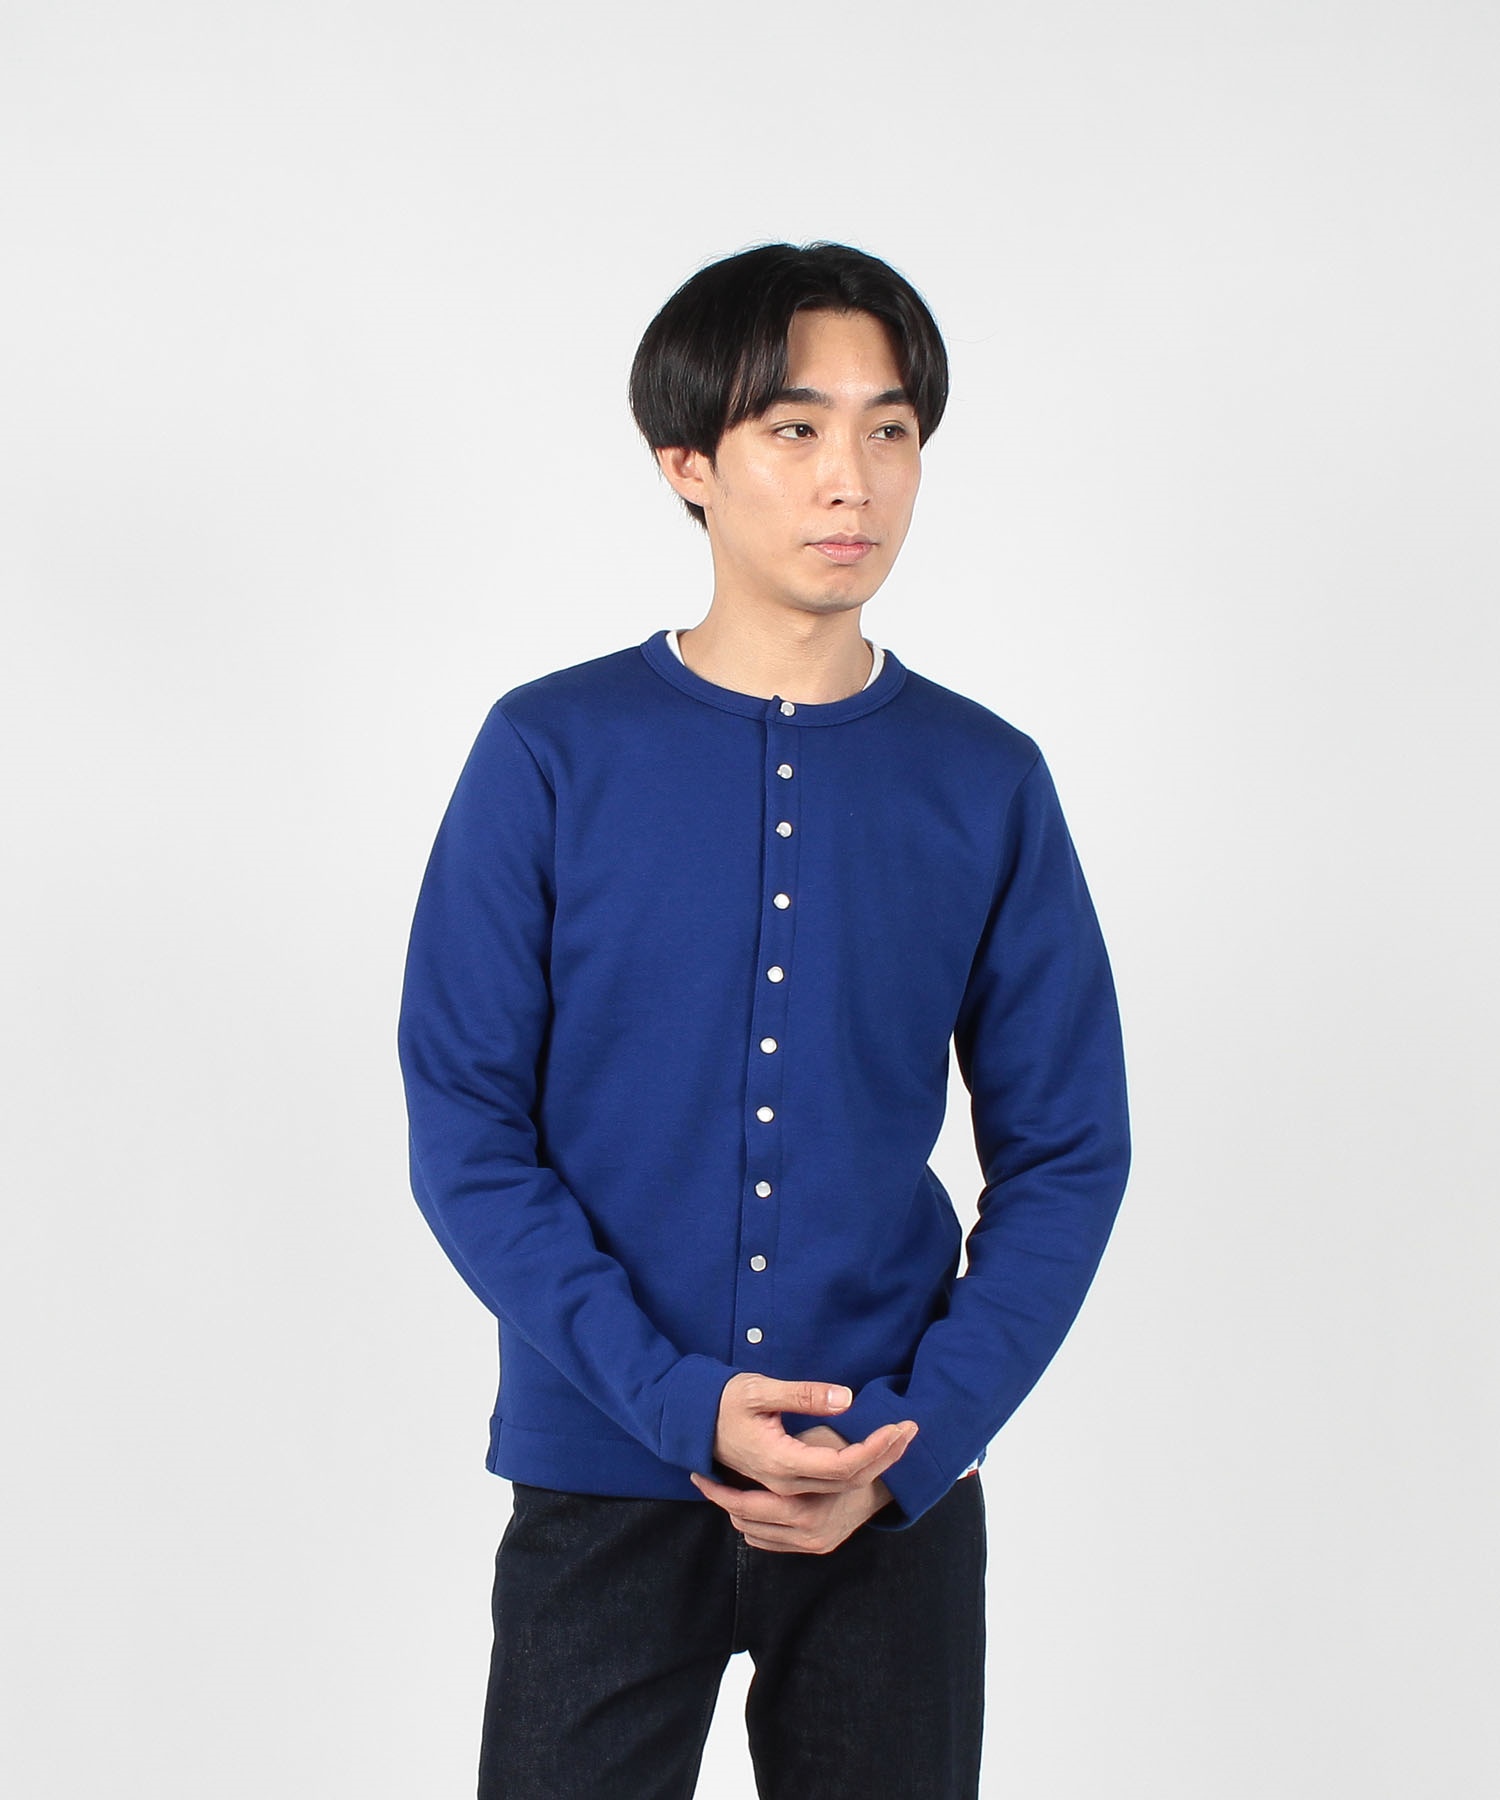 M001 CARDIGAN カーディガンプレッション [Made in France](505490794